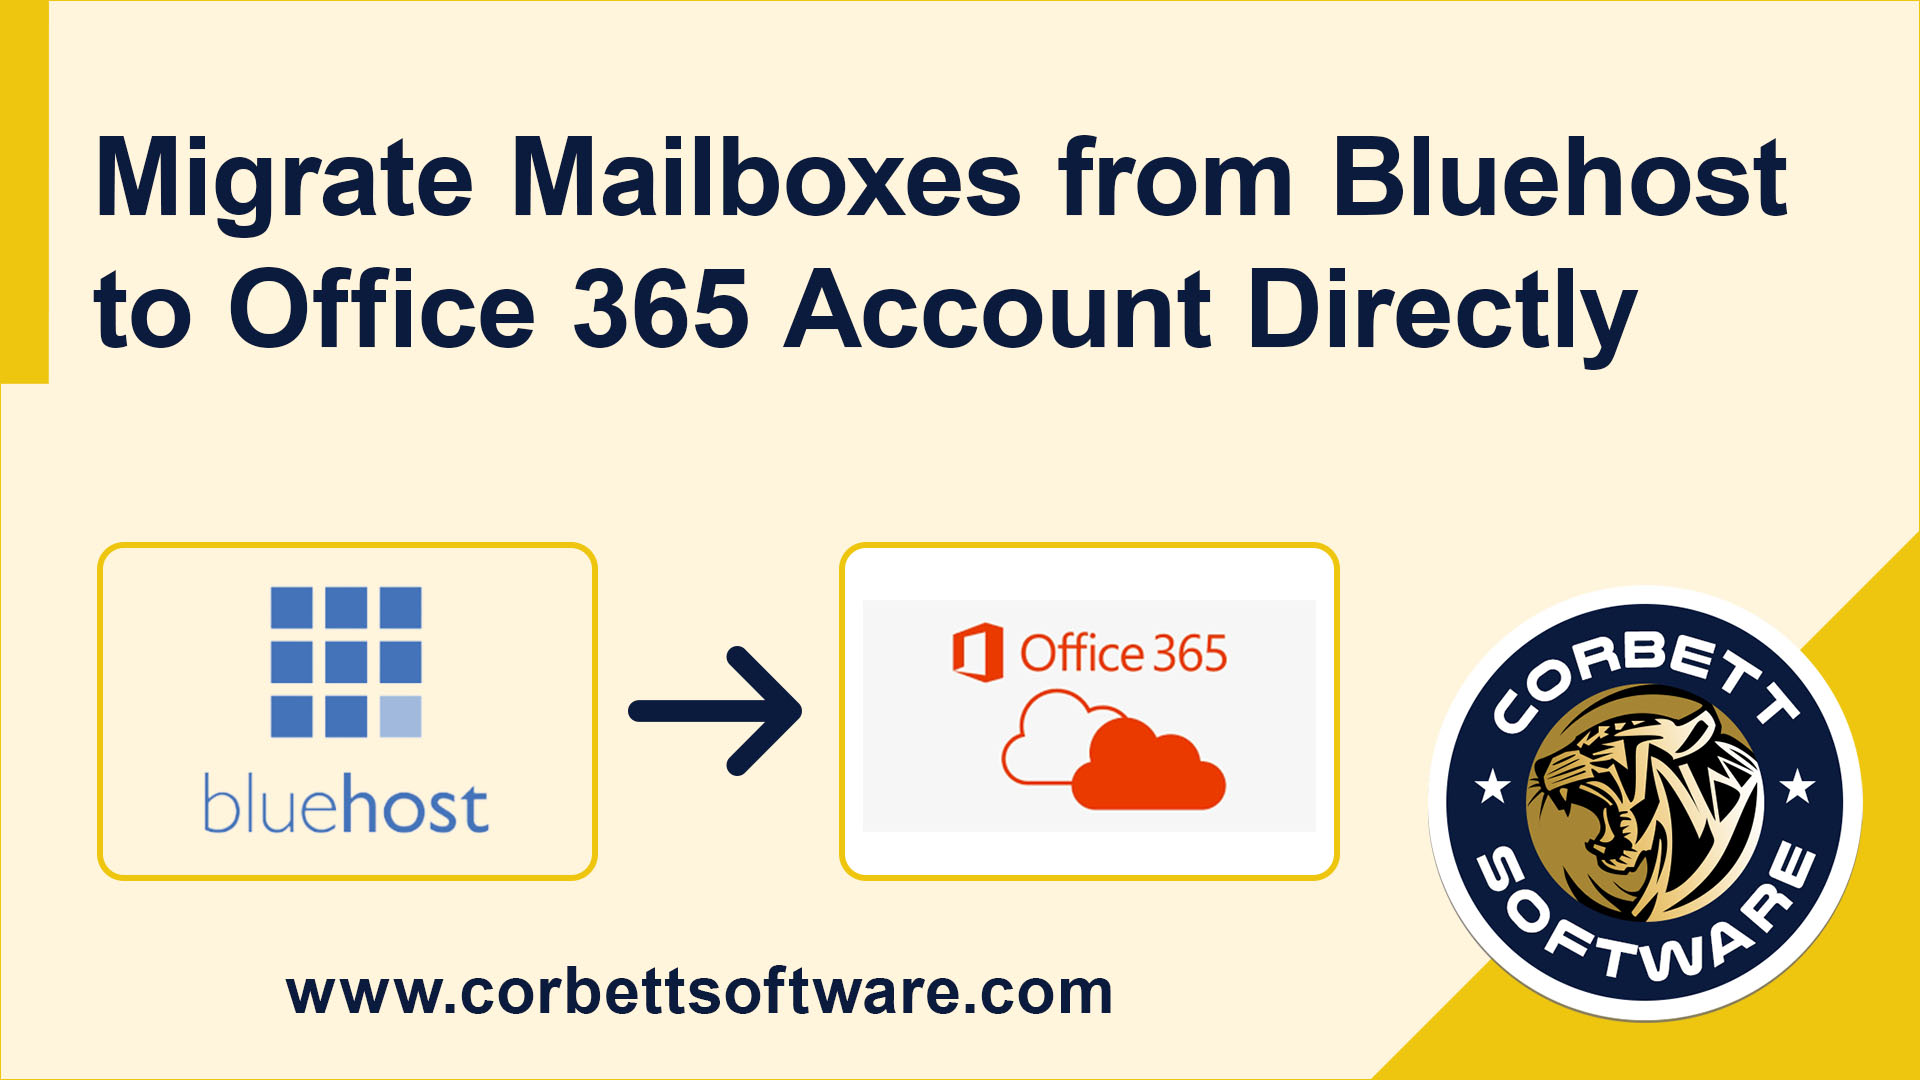 Migrate Mailboxes from Bluehost to Office 365 Account